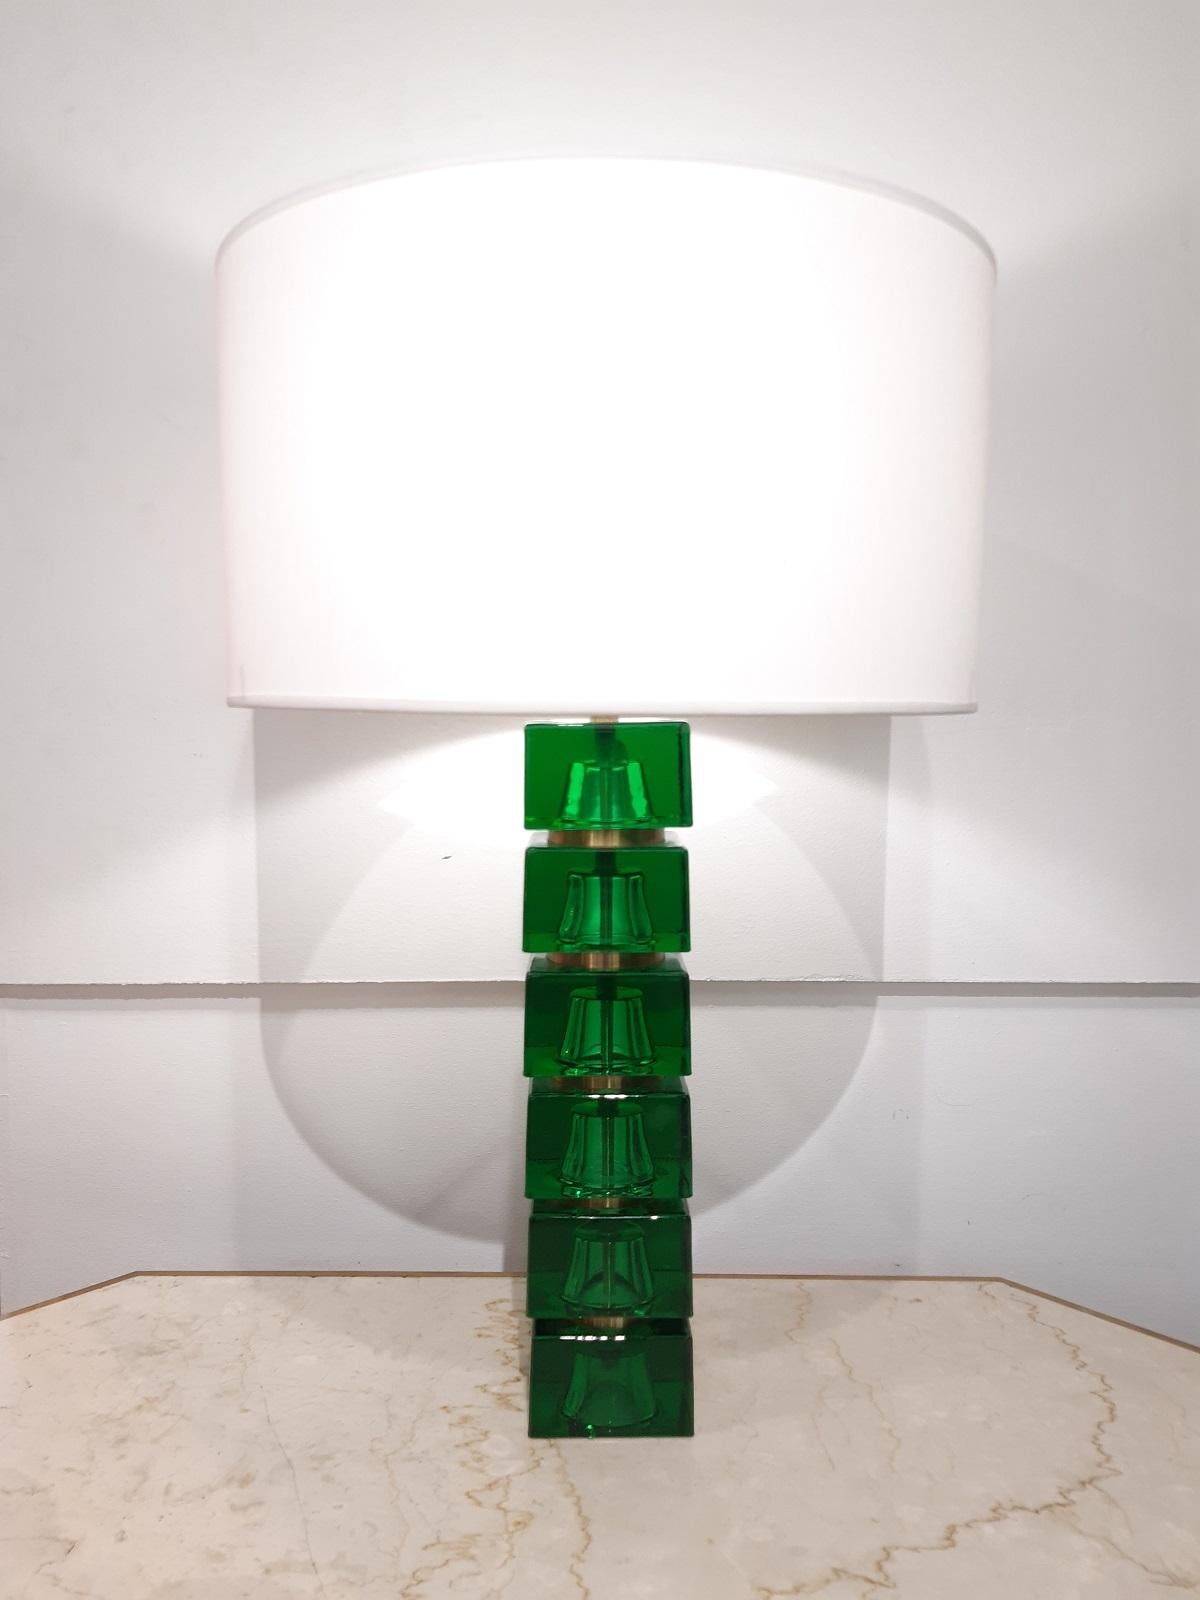 Carl Fagerlund glass table lamp Orrefors 1960 Sweden
Scandinavian midcentury design ! 


Green colored glass and brass.
Good condition ! European wiring

Socket height 40cm
Base 8cm

Shade (not included) height 19cm, diameter 35cm.